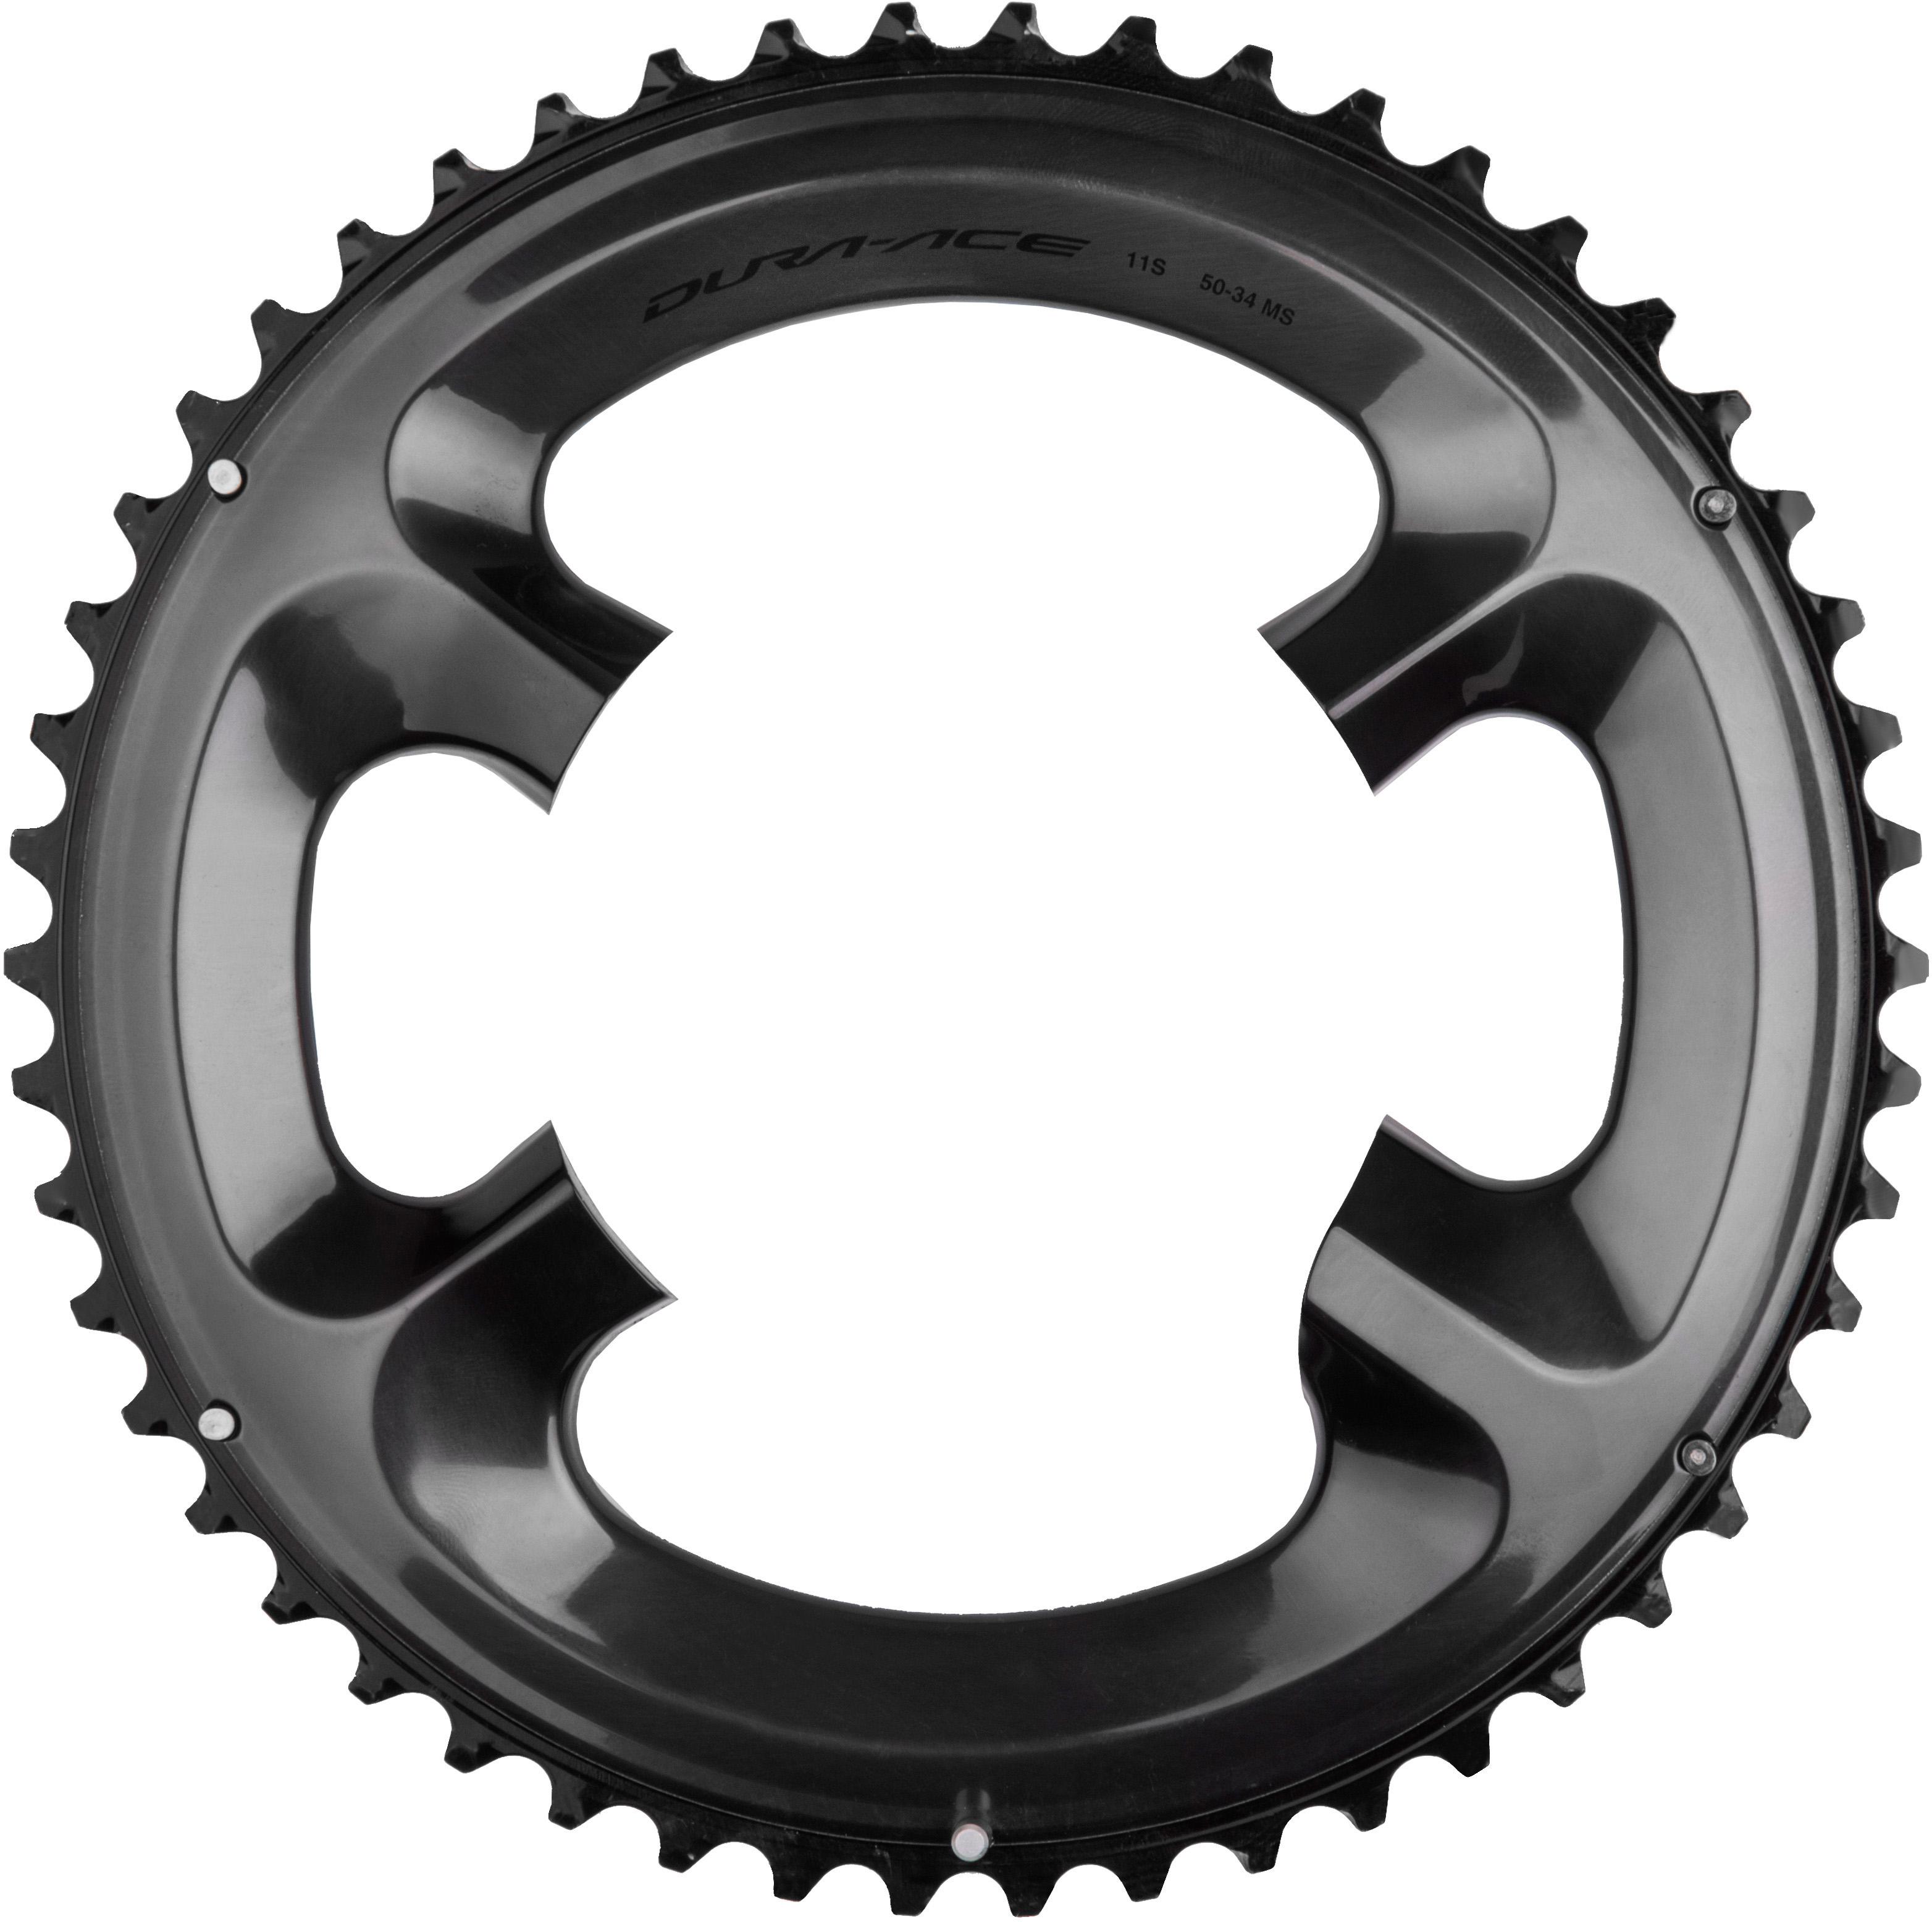 Fc-R9100 Chainring 53T-Mw For 53-39T